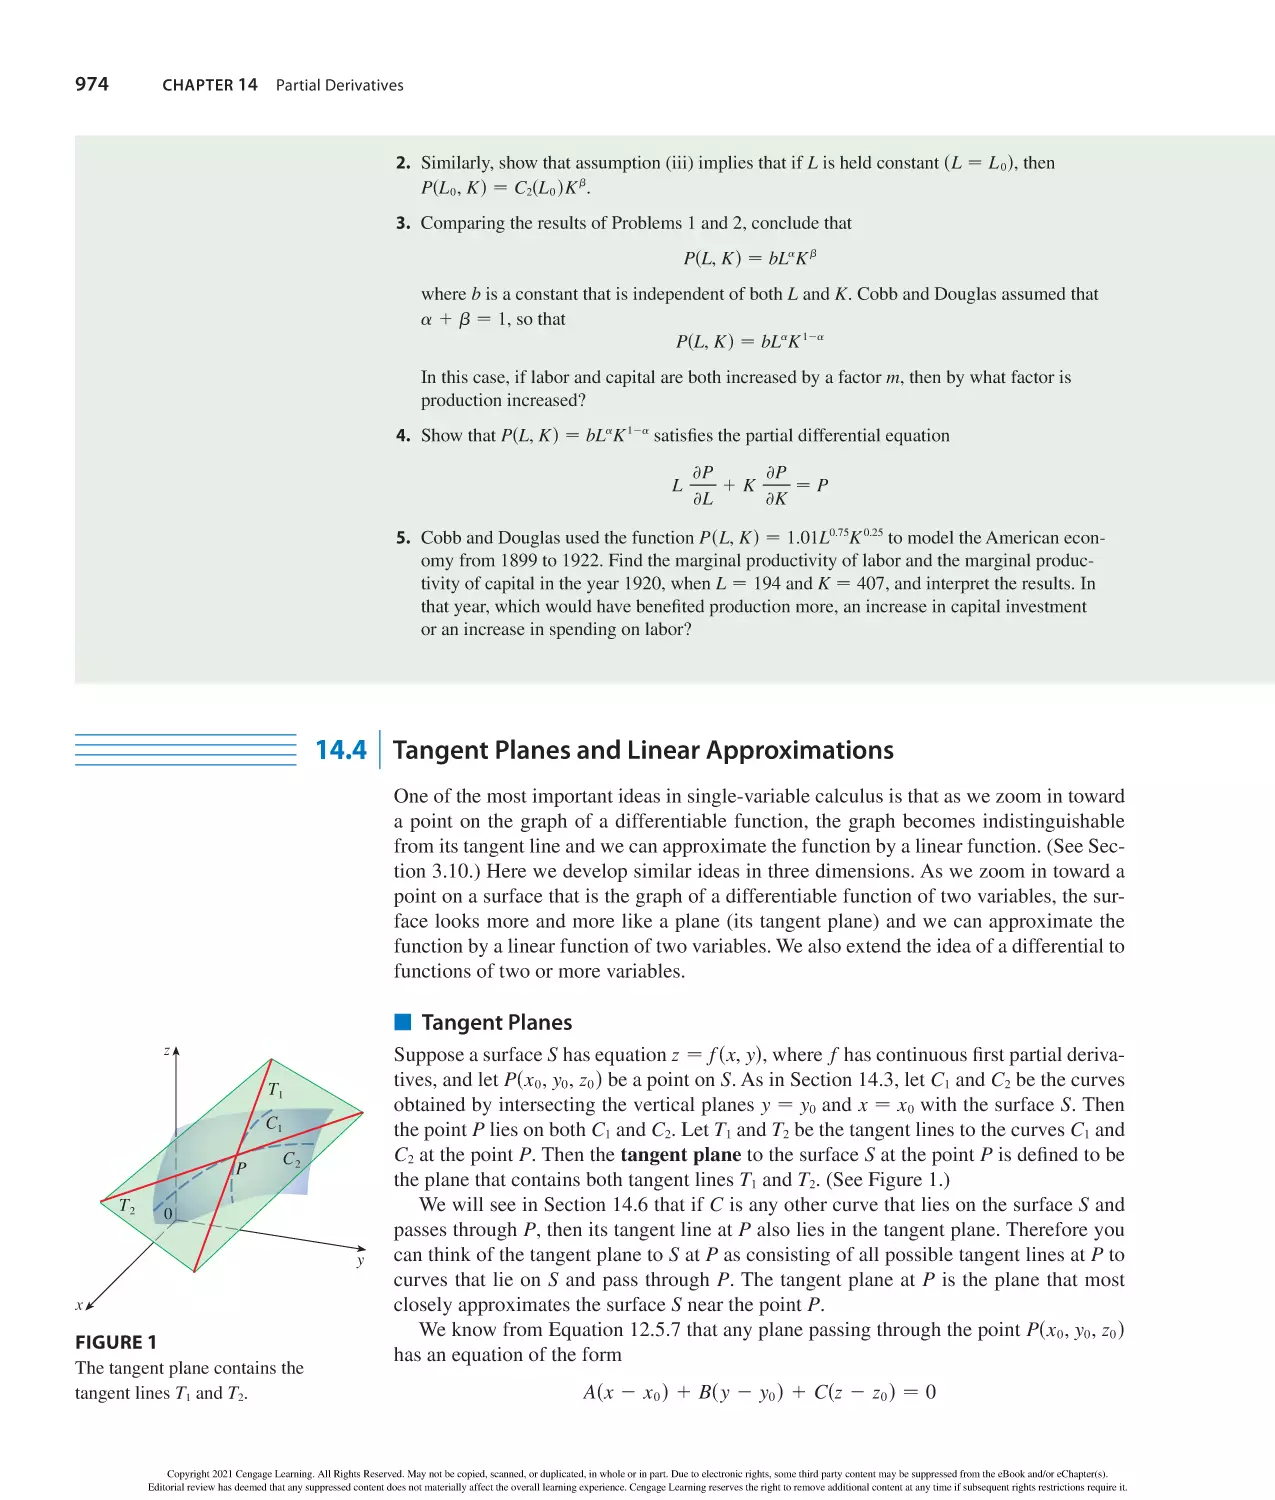 14.4 Tangent Planes and Linear Approximations